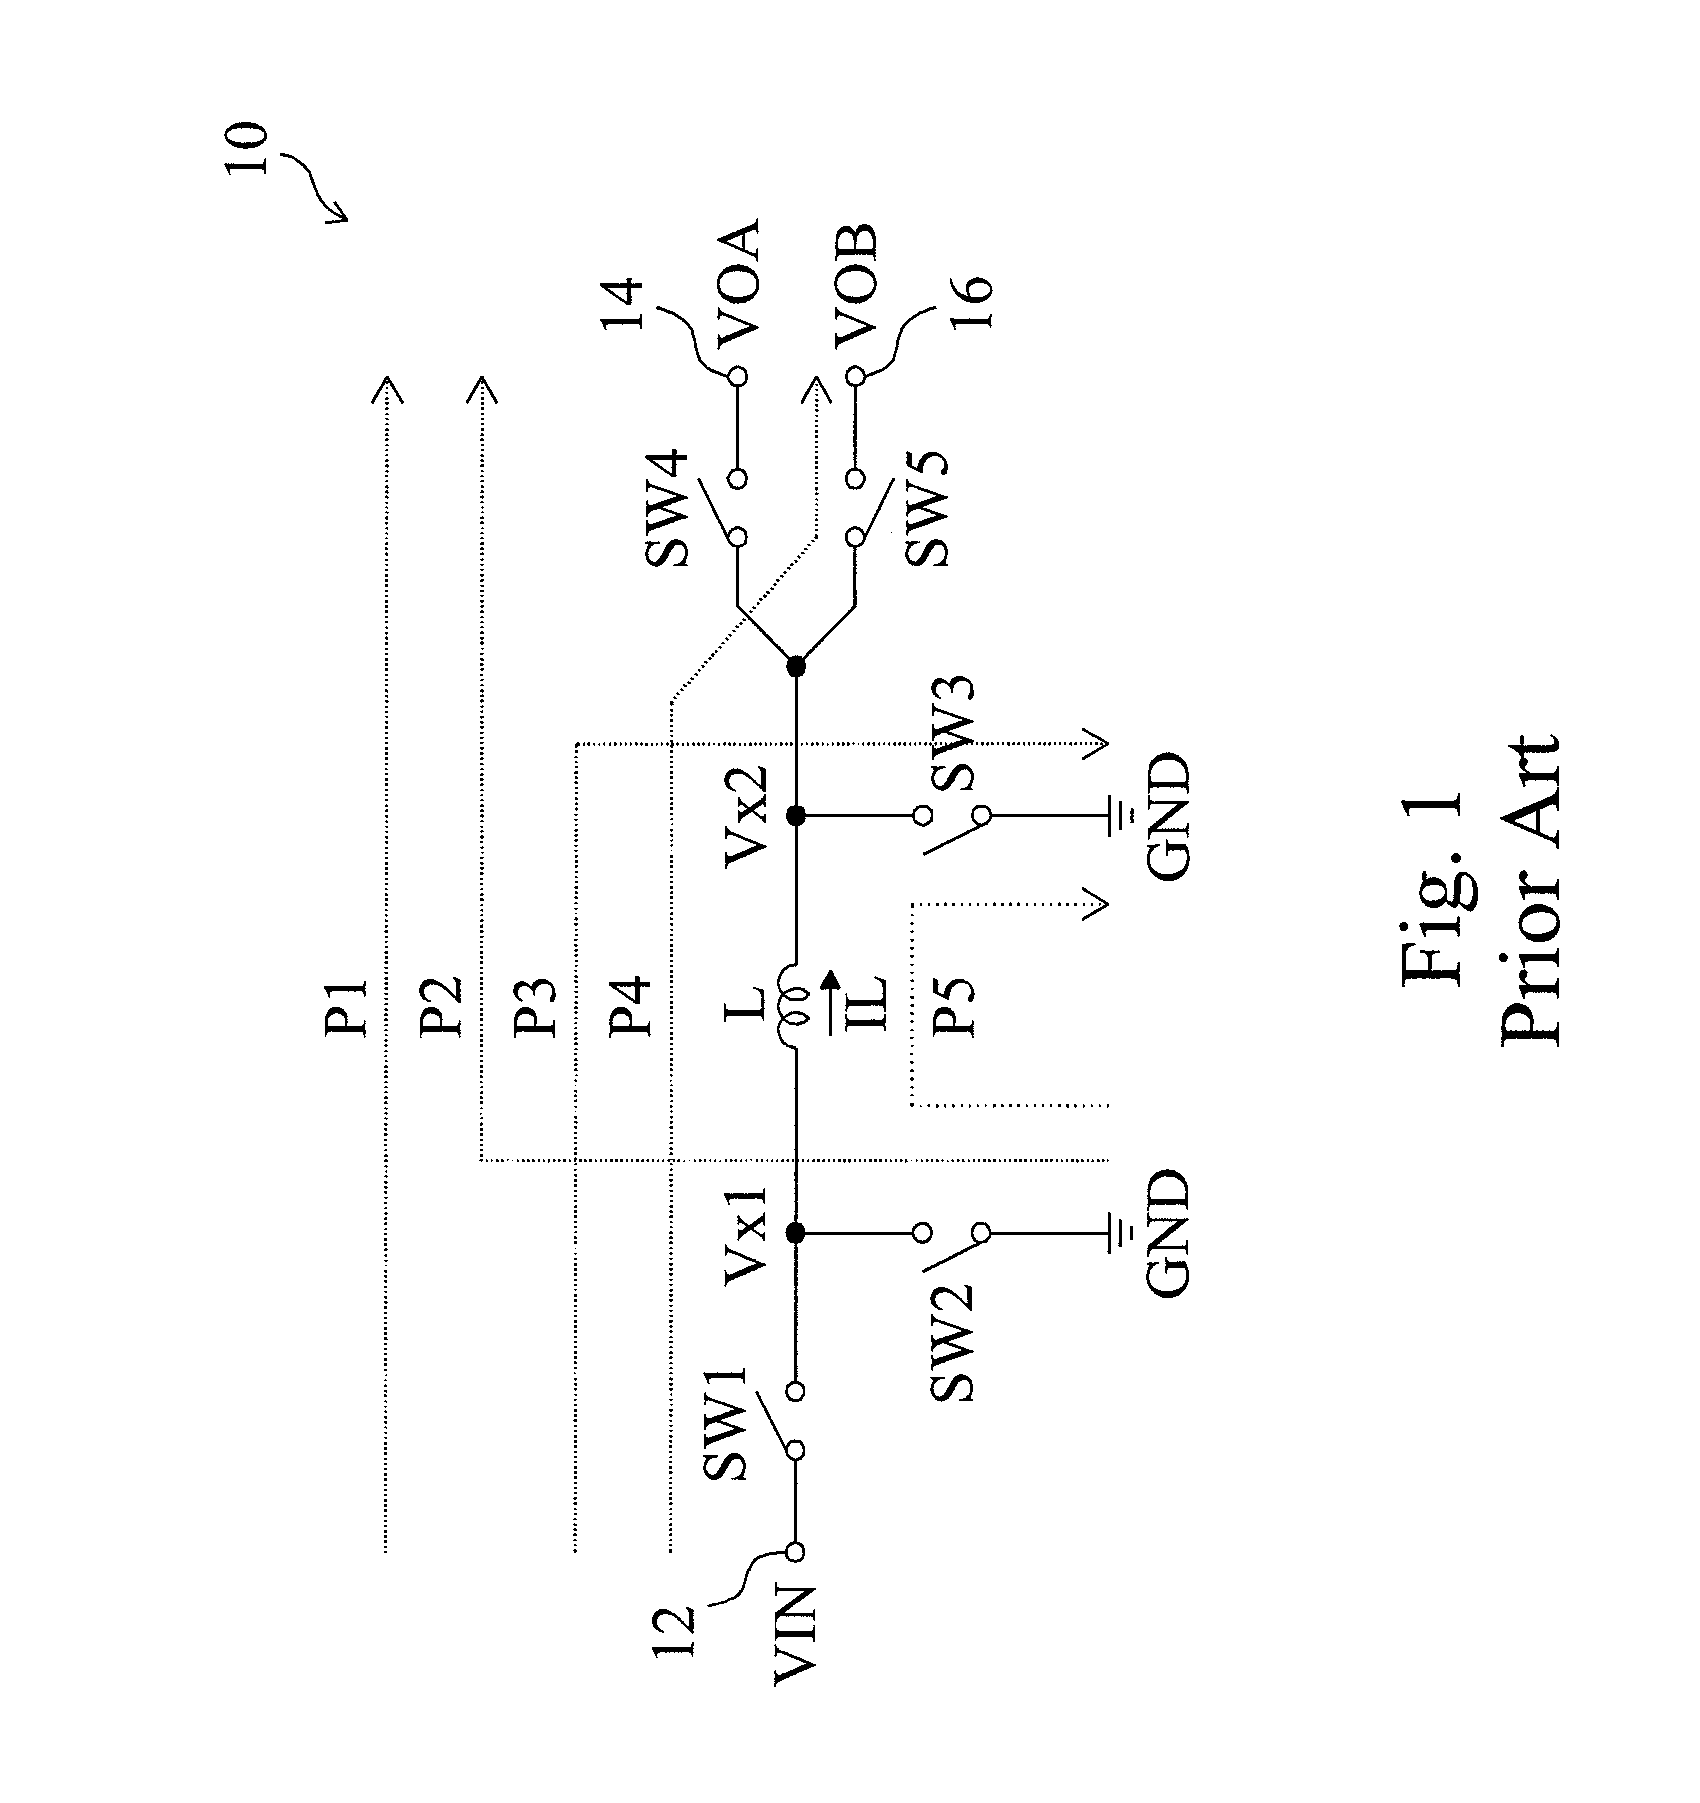 Single-inductor multiple-output power converter